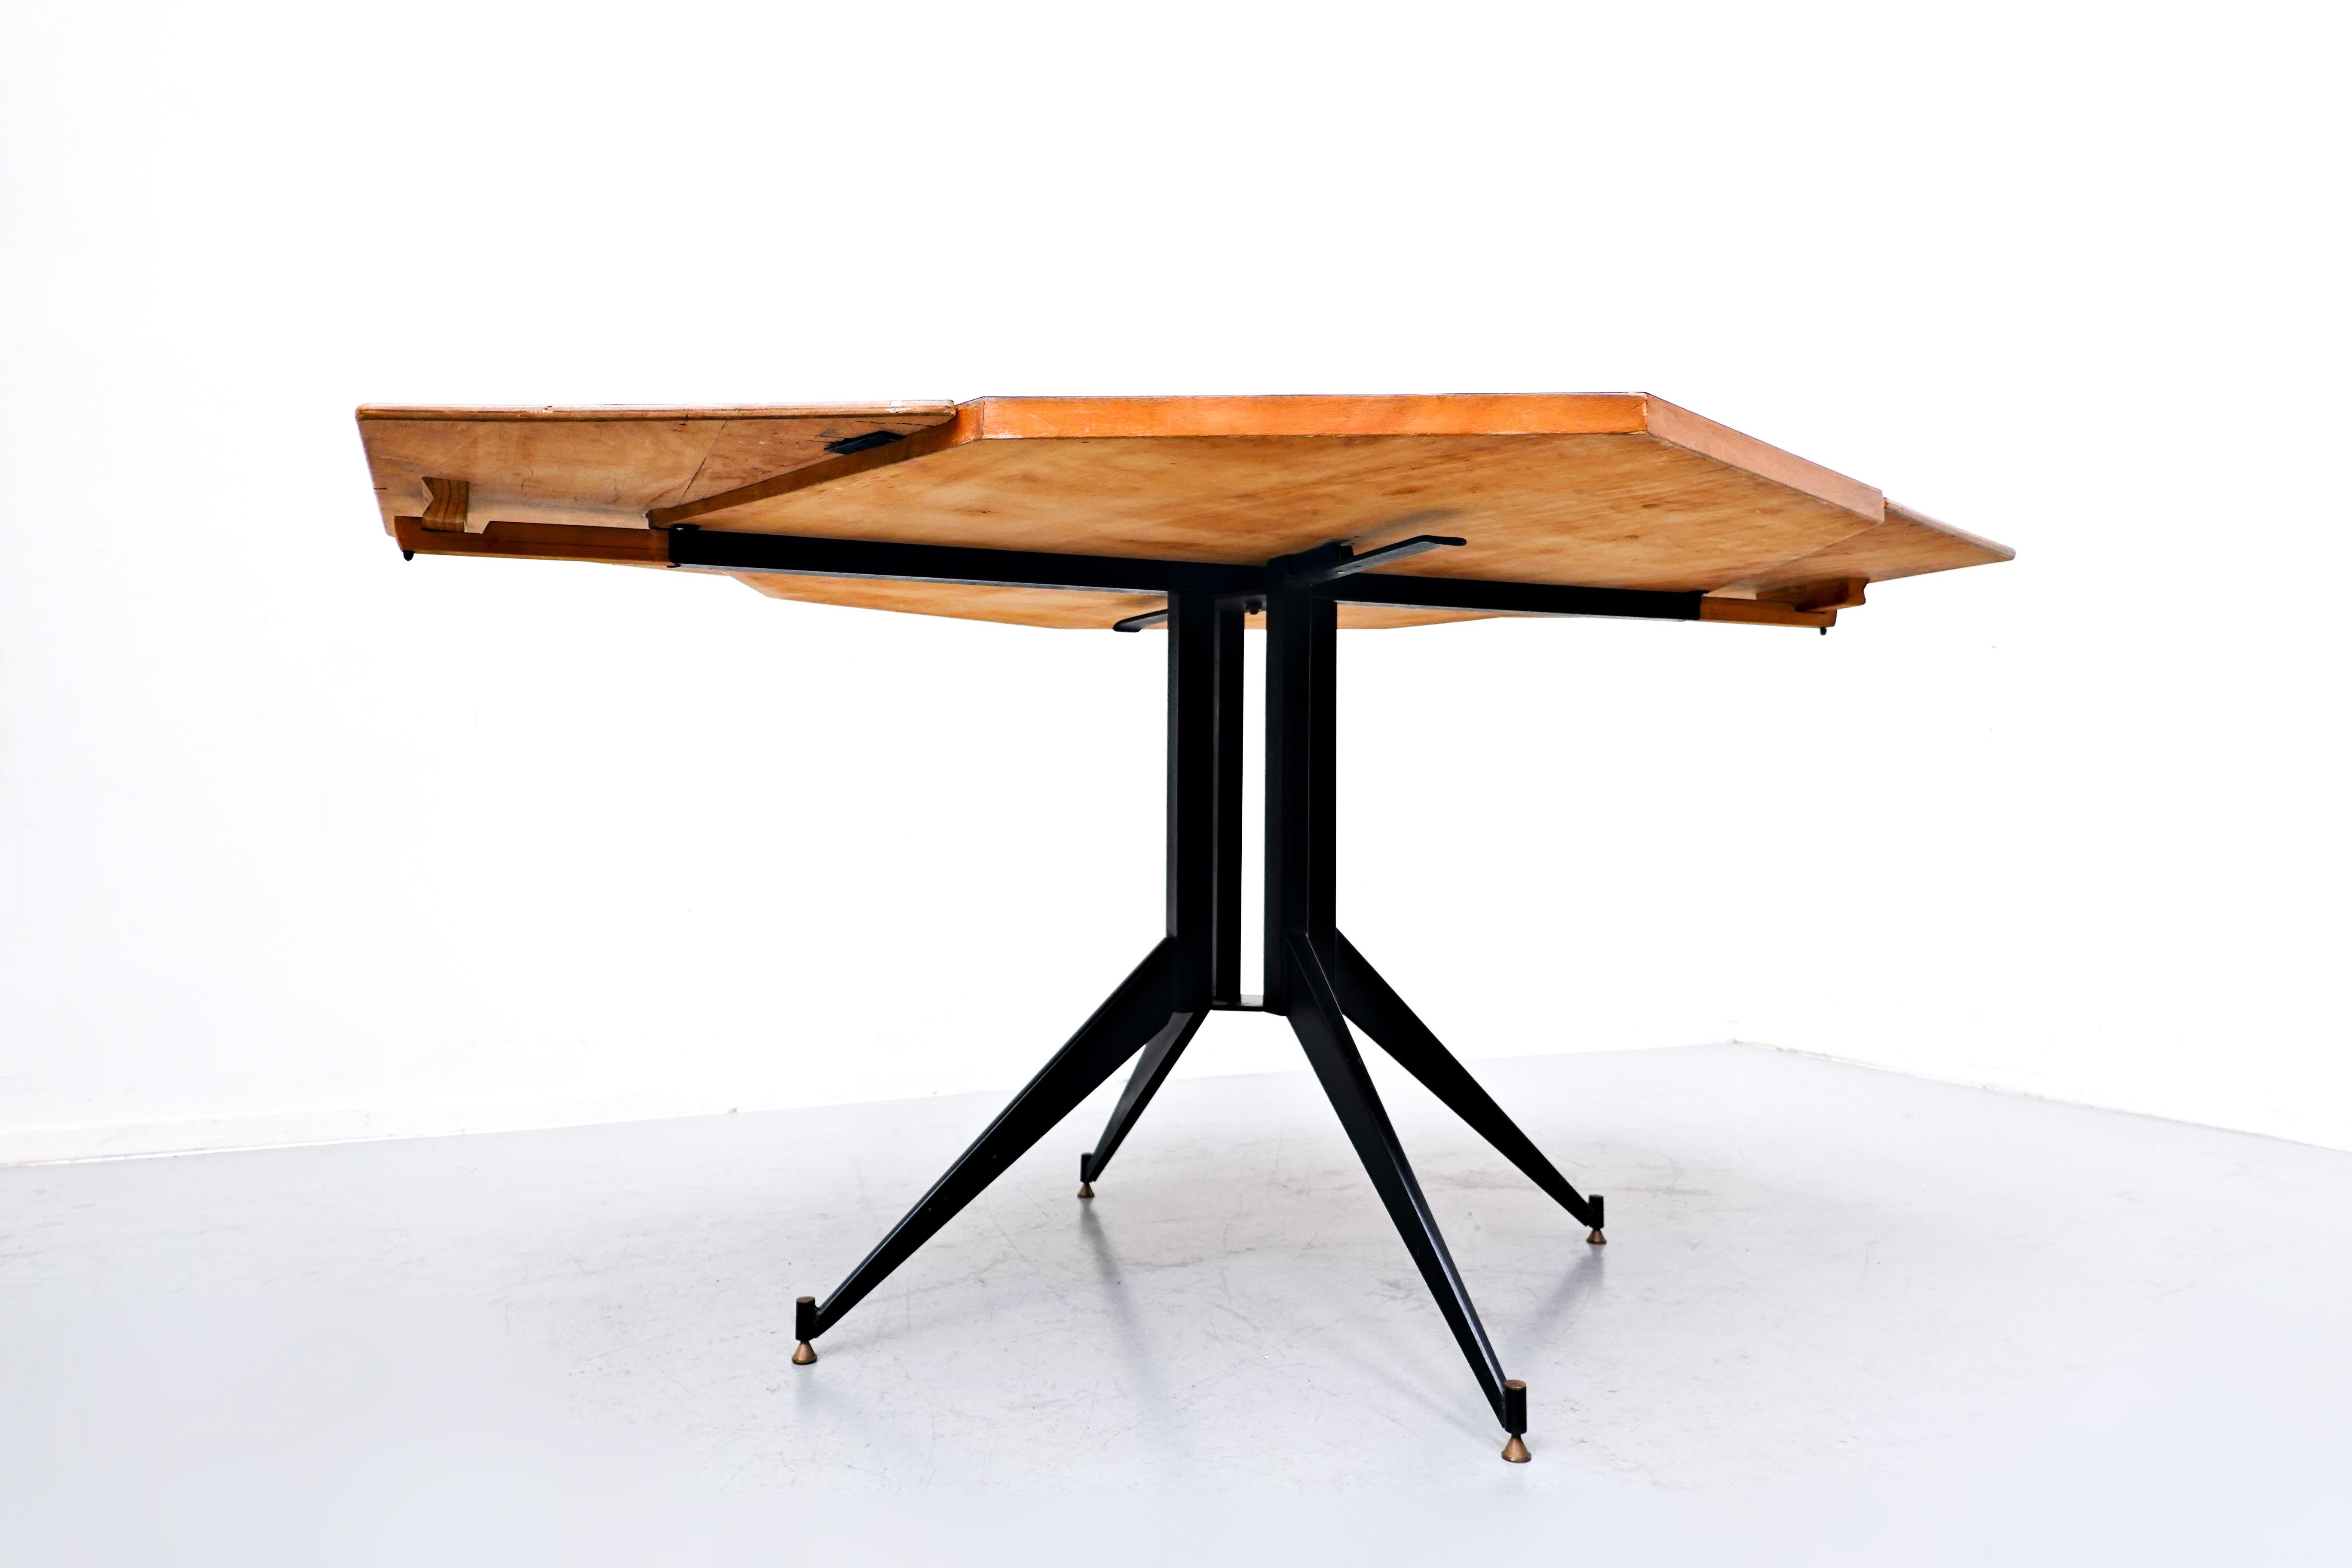 Italian Mid-Century Extendable Dining Table by Carlo Ratti, 1960s